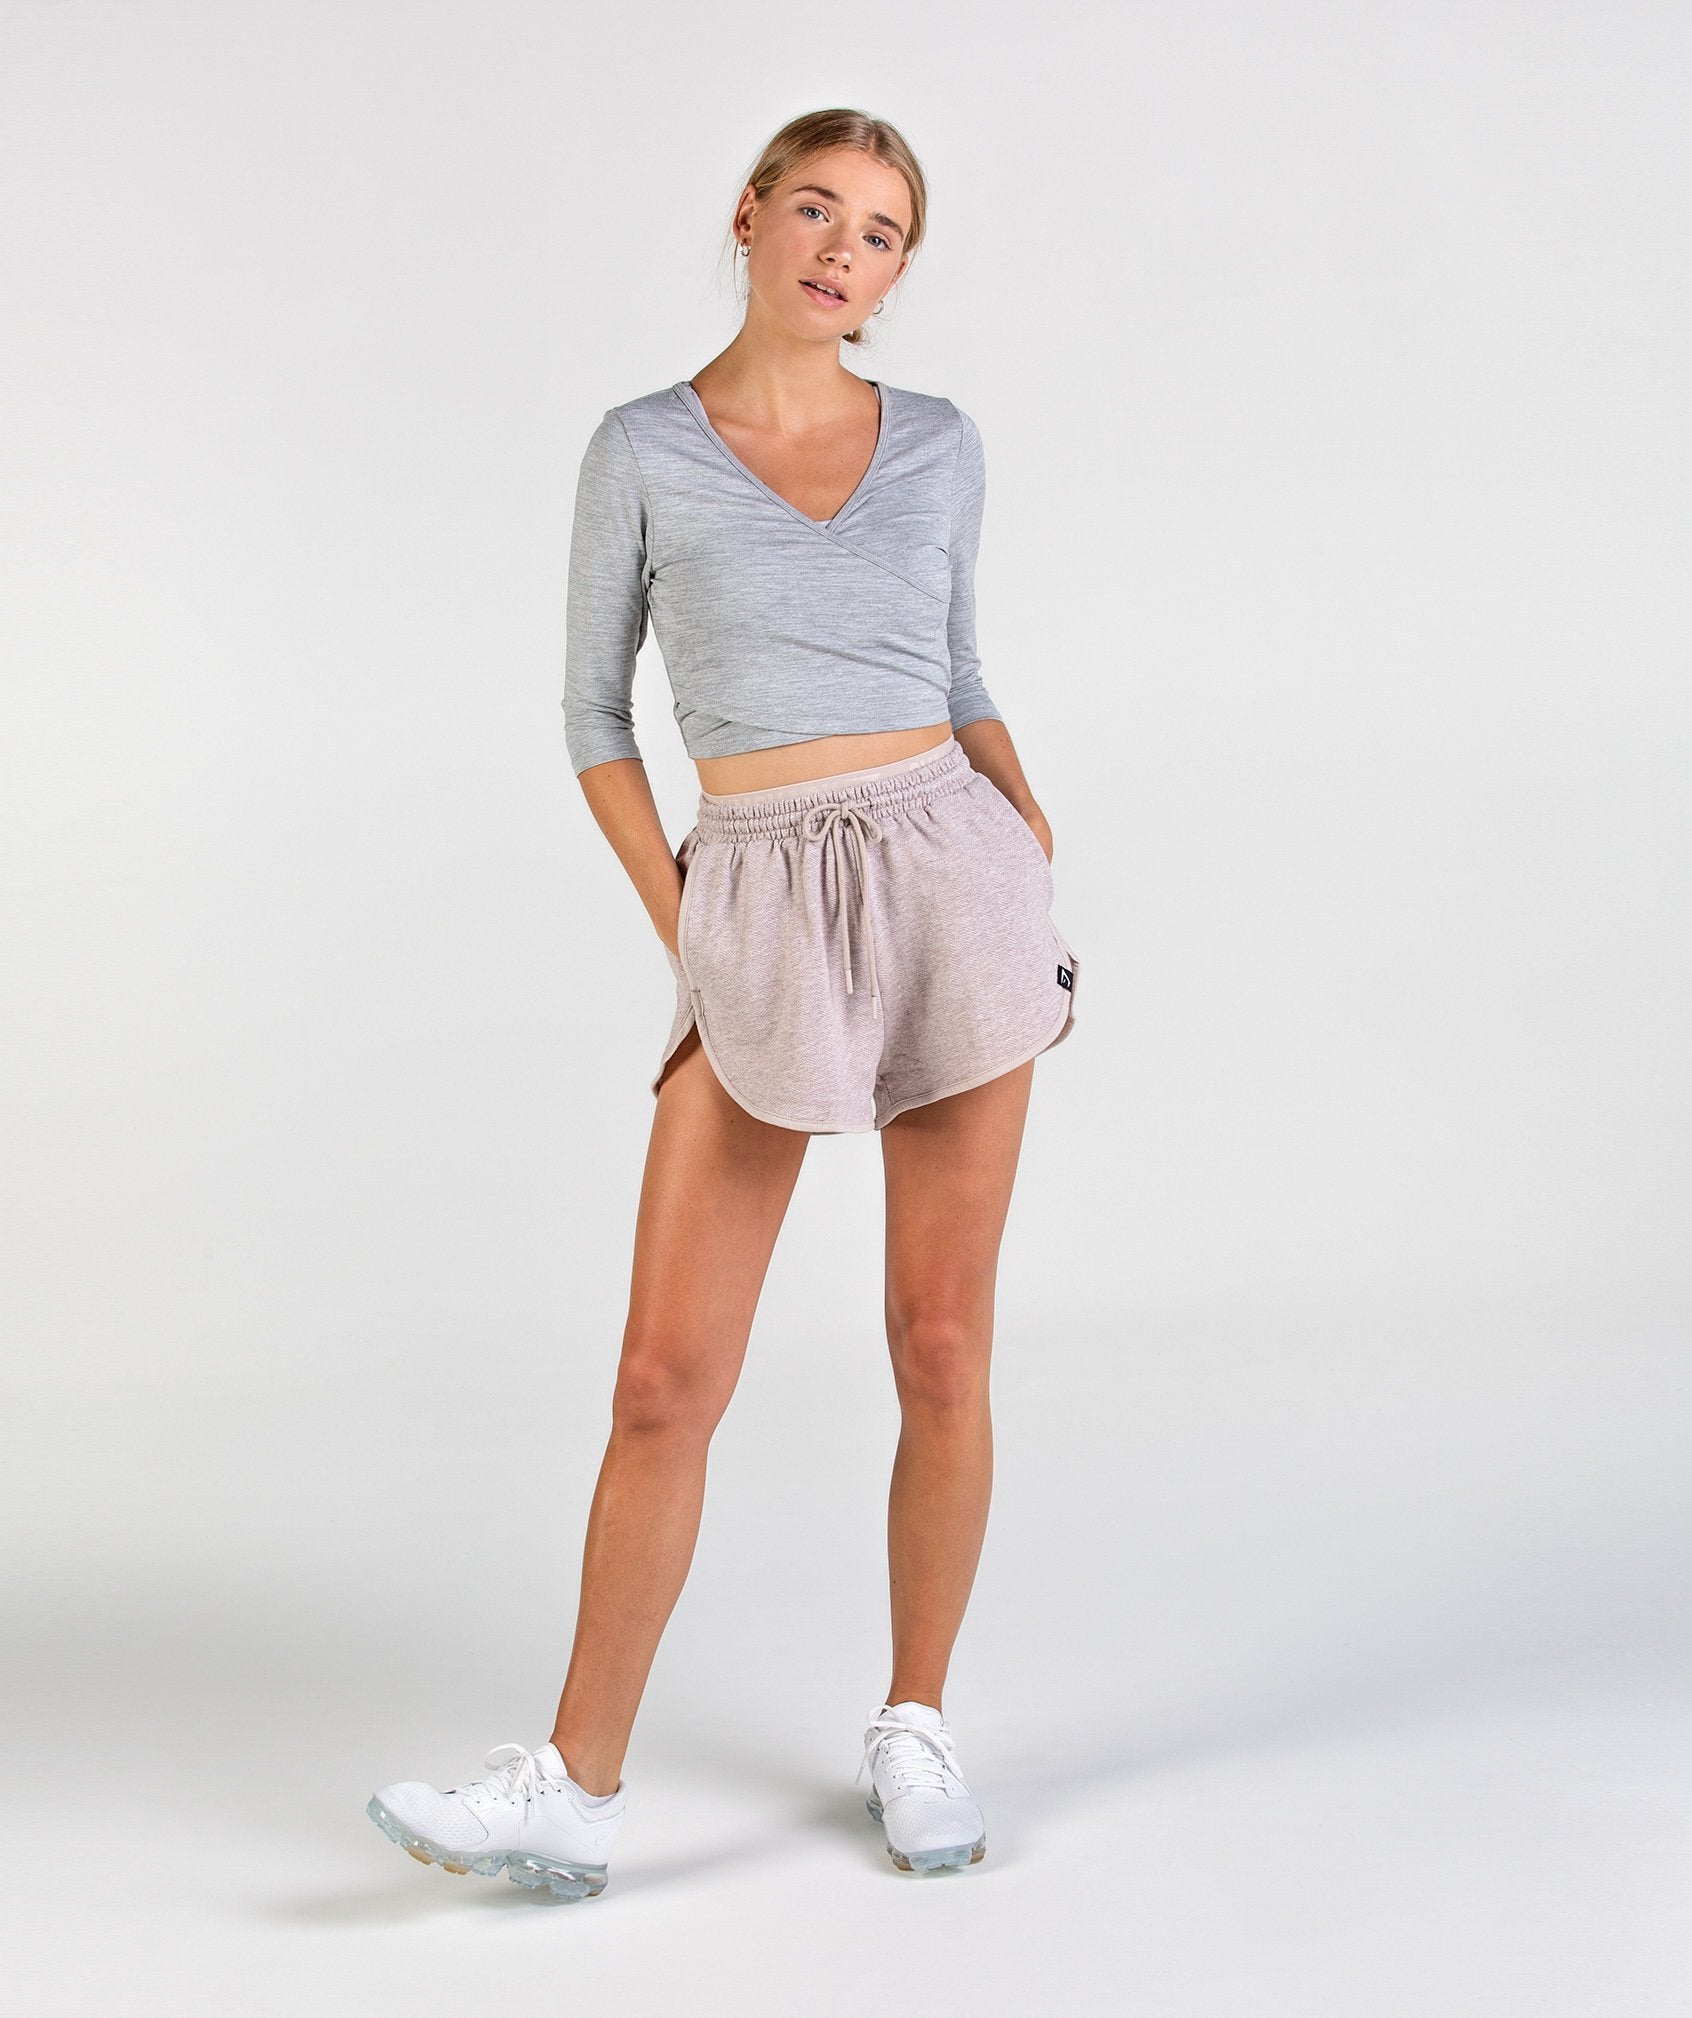 Heather Dual Band Shorts in Taupe Marl - view 3